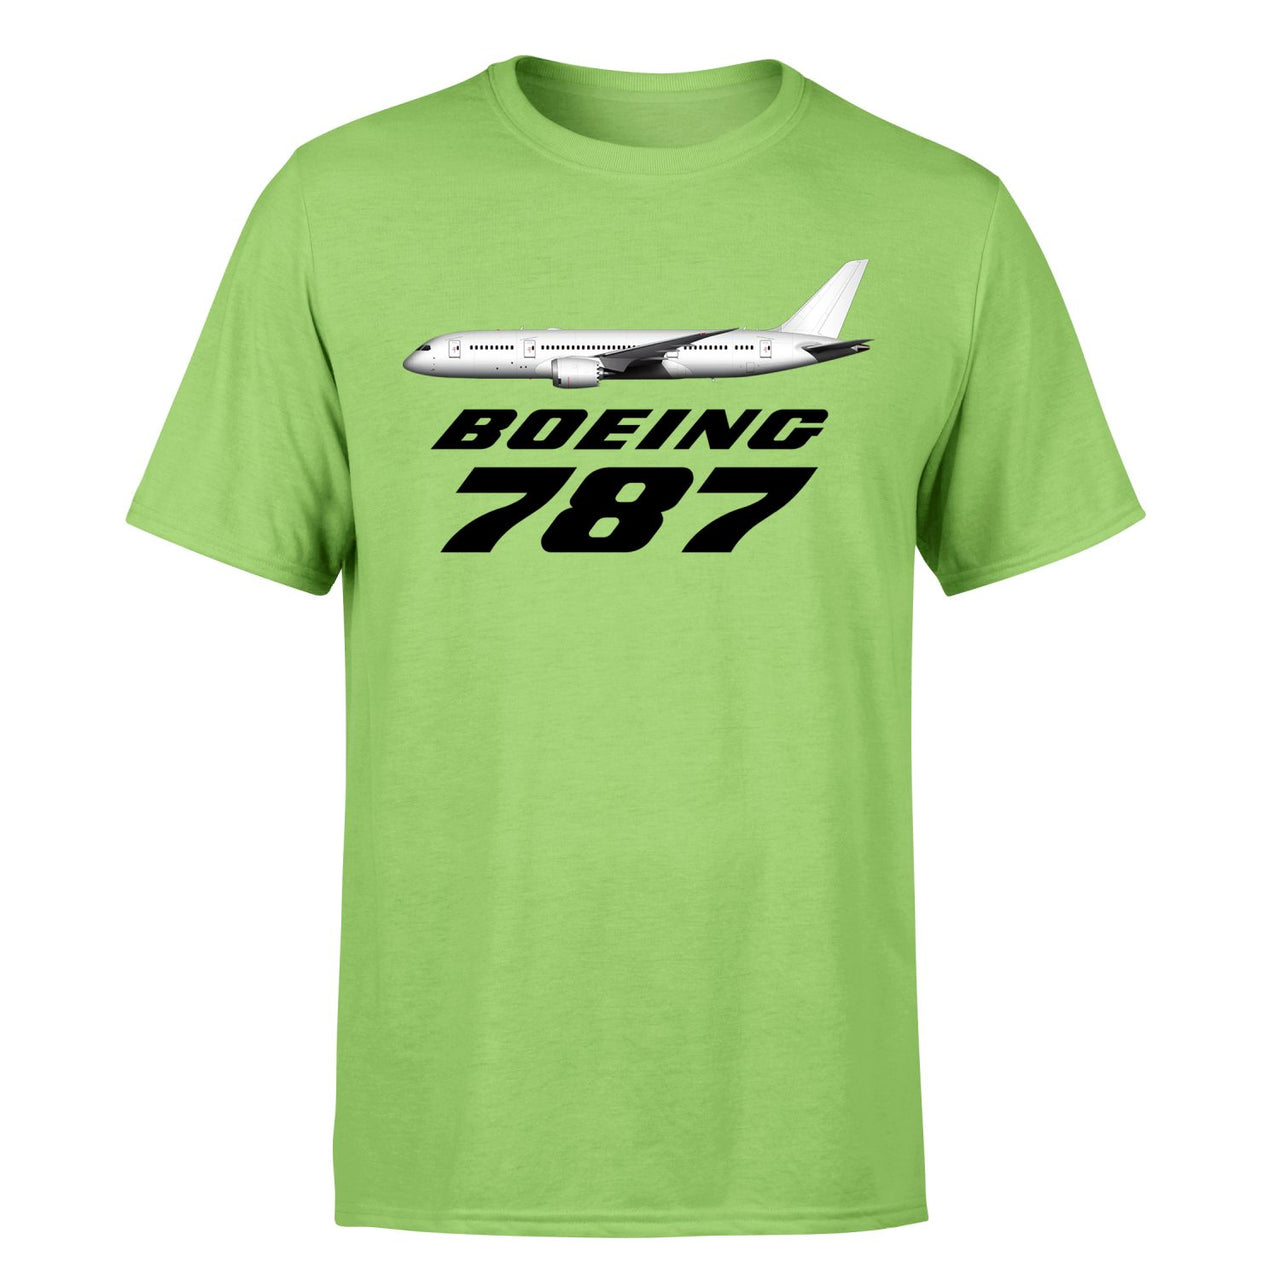 The Boeing 787 Designed T-Shirts